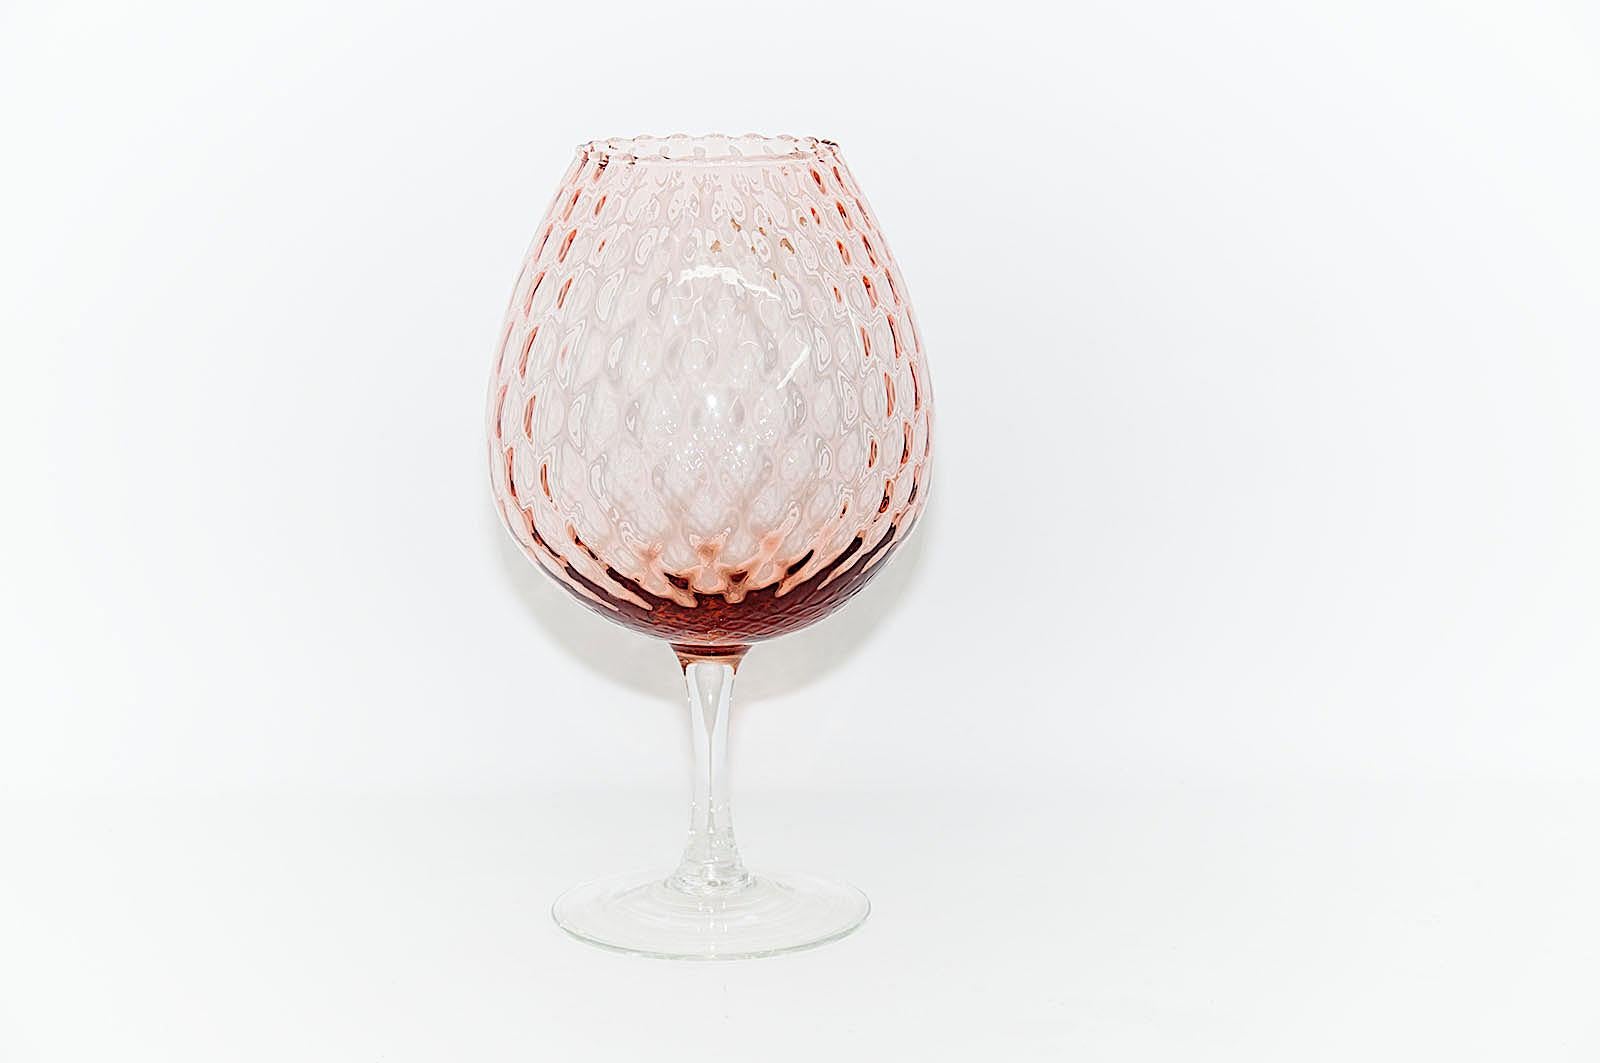 Empoli Glass Vase, Italy, 1960 in Pink Color with Relief Patterns 2